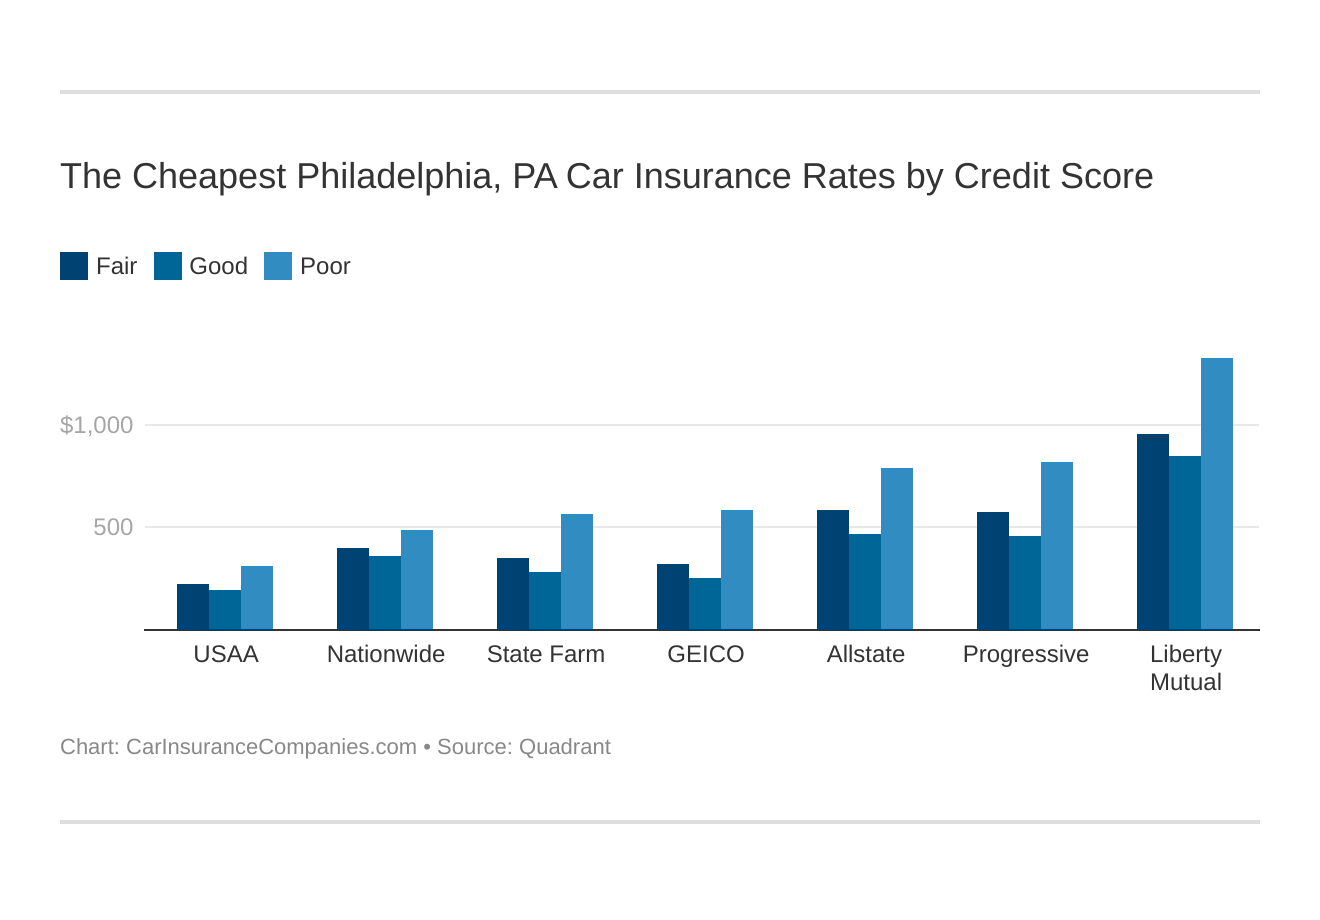 The Cheapest Philadelphia, PA Car Insurance Rates by Credit Score